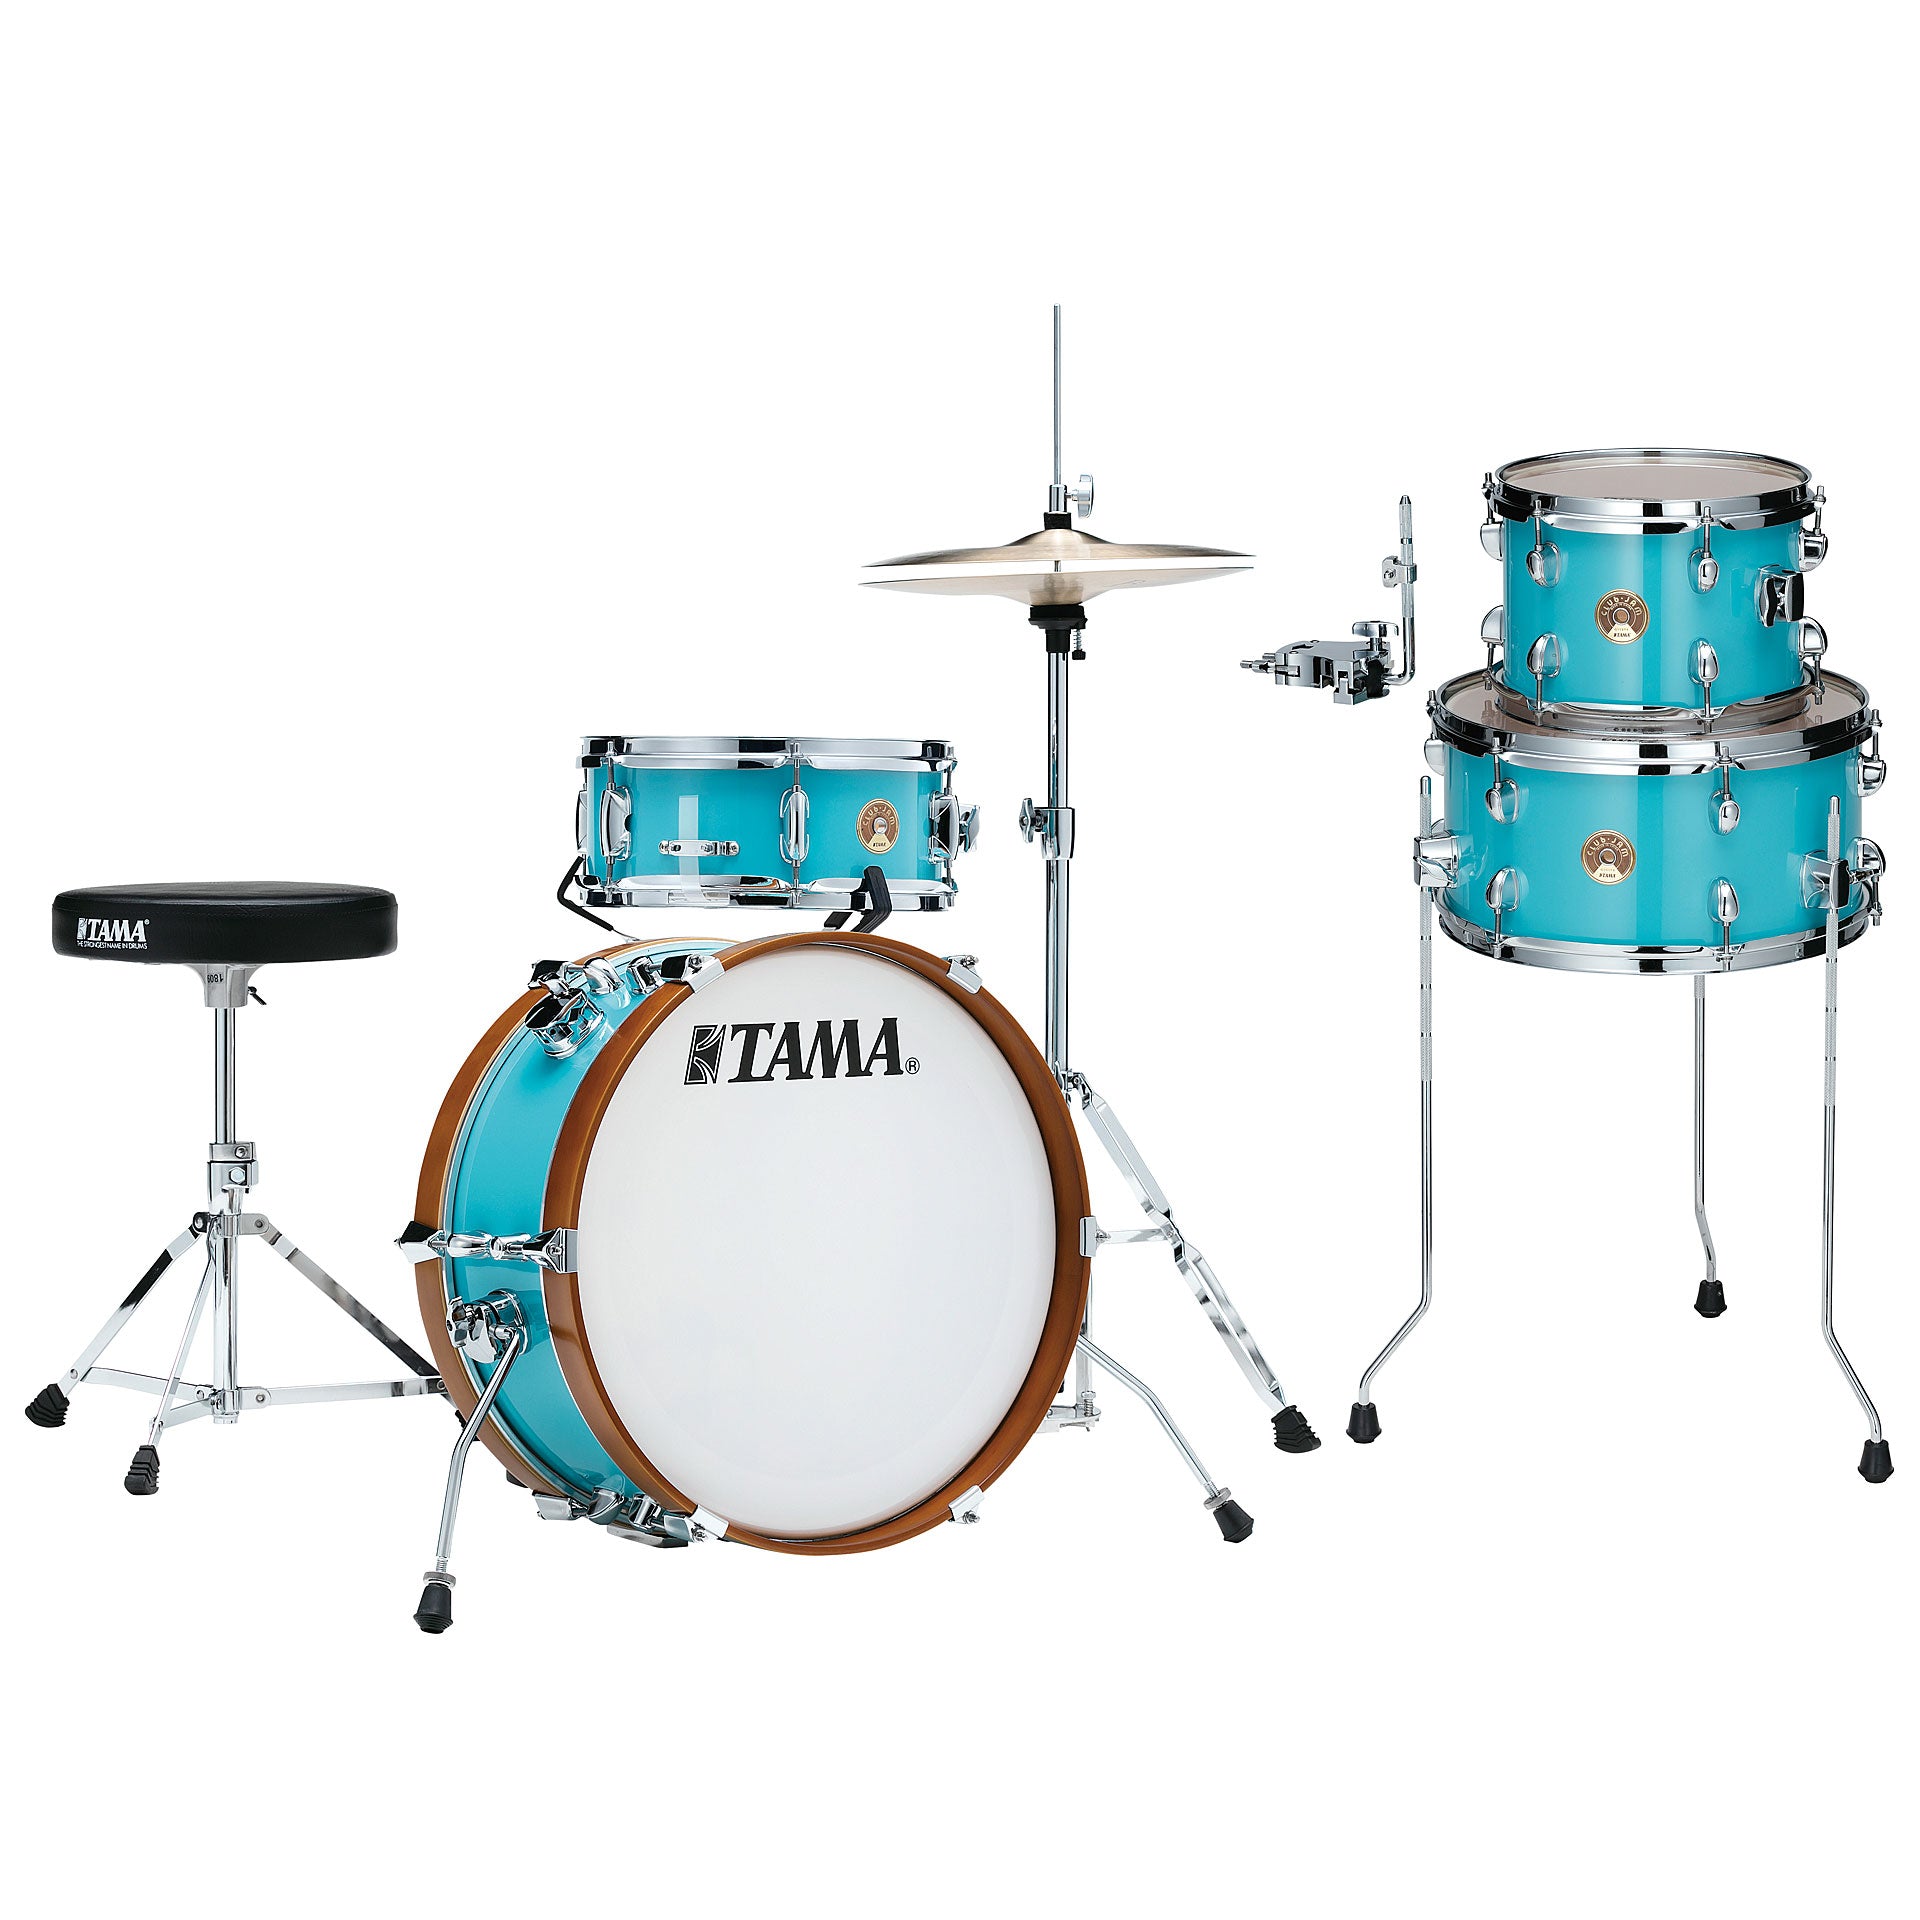 TAMA Club Jam Mini Drum Set w/ Add-on Drums & Hardware (Available in 3 Colors)